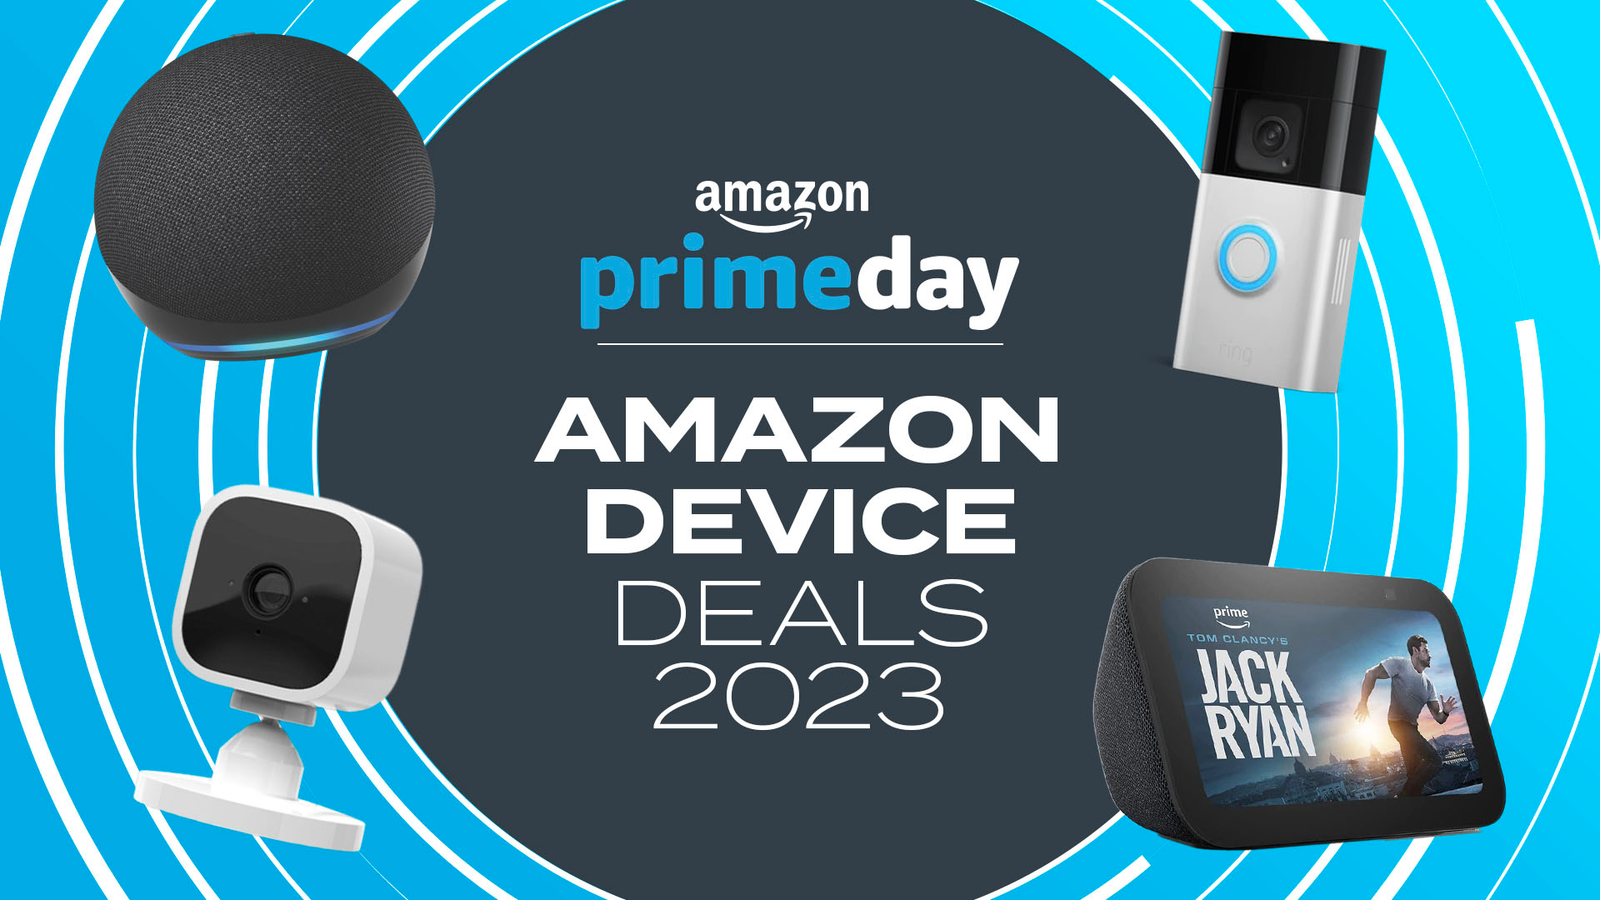 https://assetsio.reedpopcdn.com/Jelly_Deals_Prime-Day_AmazonDevices_2023_AW.jpg?width=1600&height=900&fit=crop&quality=100&format=png&enable=upscale&auto=webp